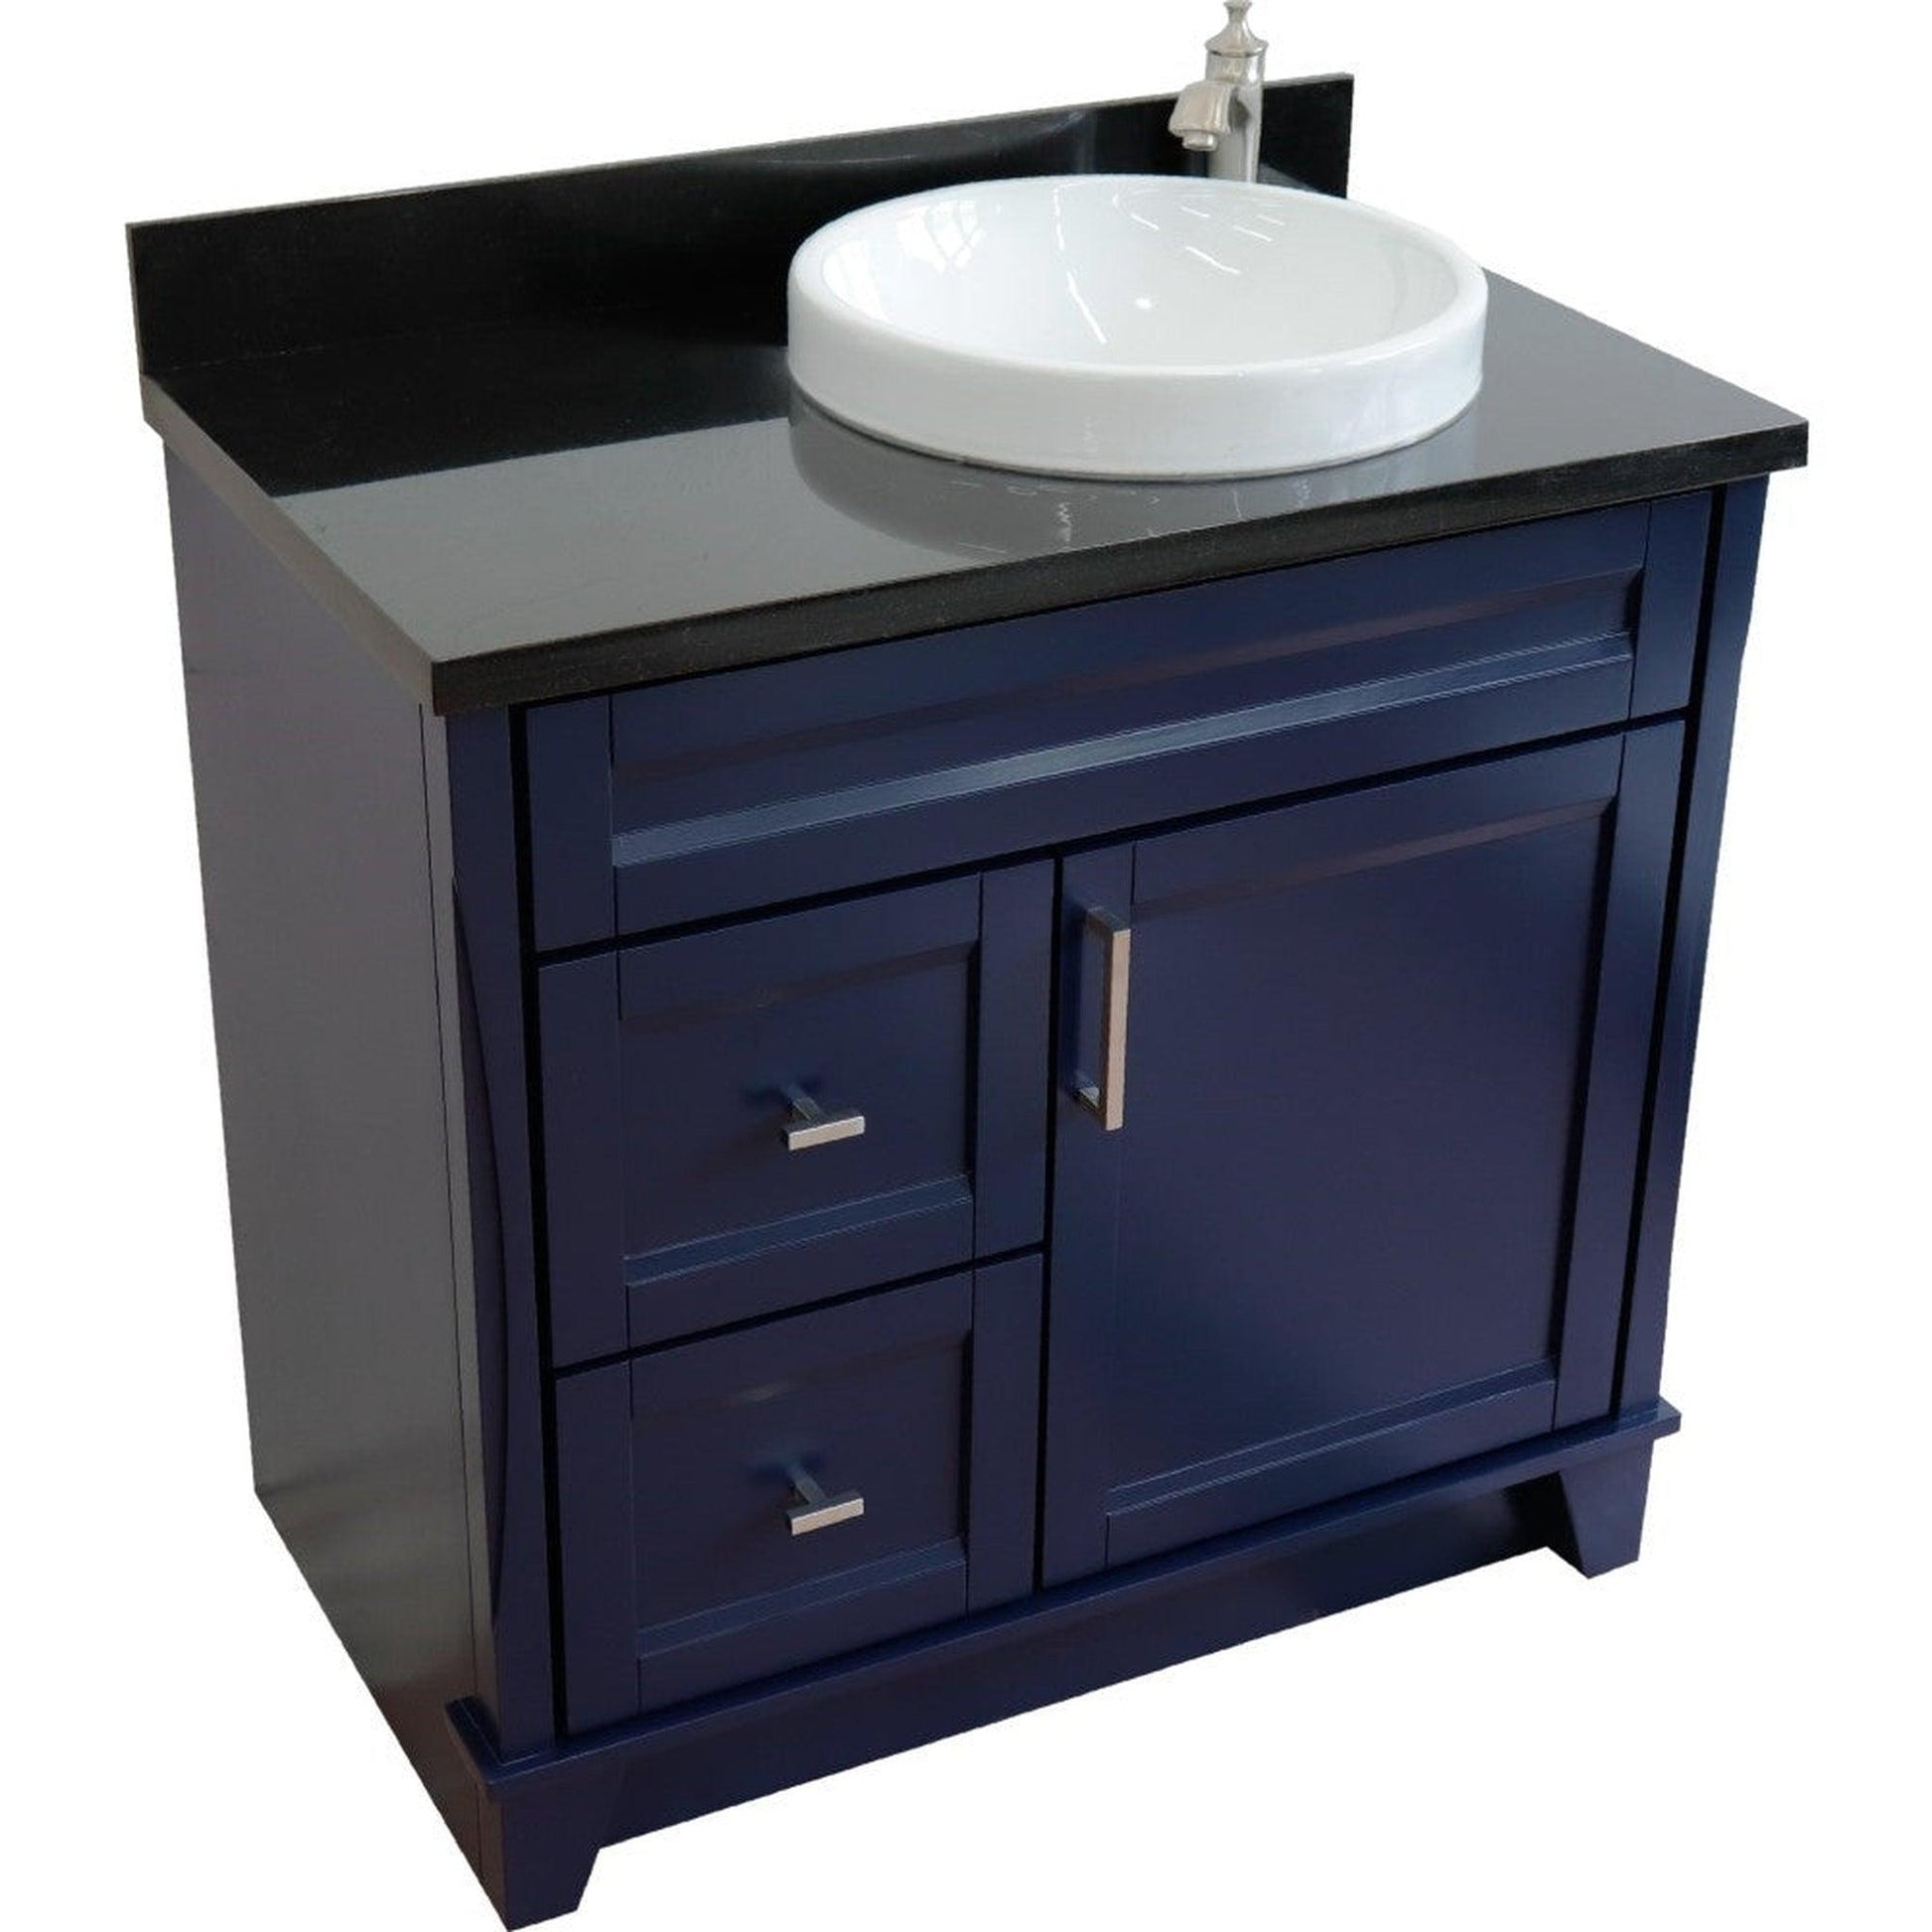 Bellaterra Home Terni 37" 1-Door 2-Drawer Blue Freestanding Vanity Set With Ceramic Right Offset Vessel Sink and Black Galaxy Granite Top, and Right Door Base